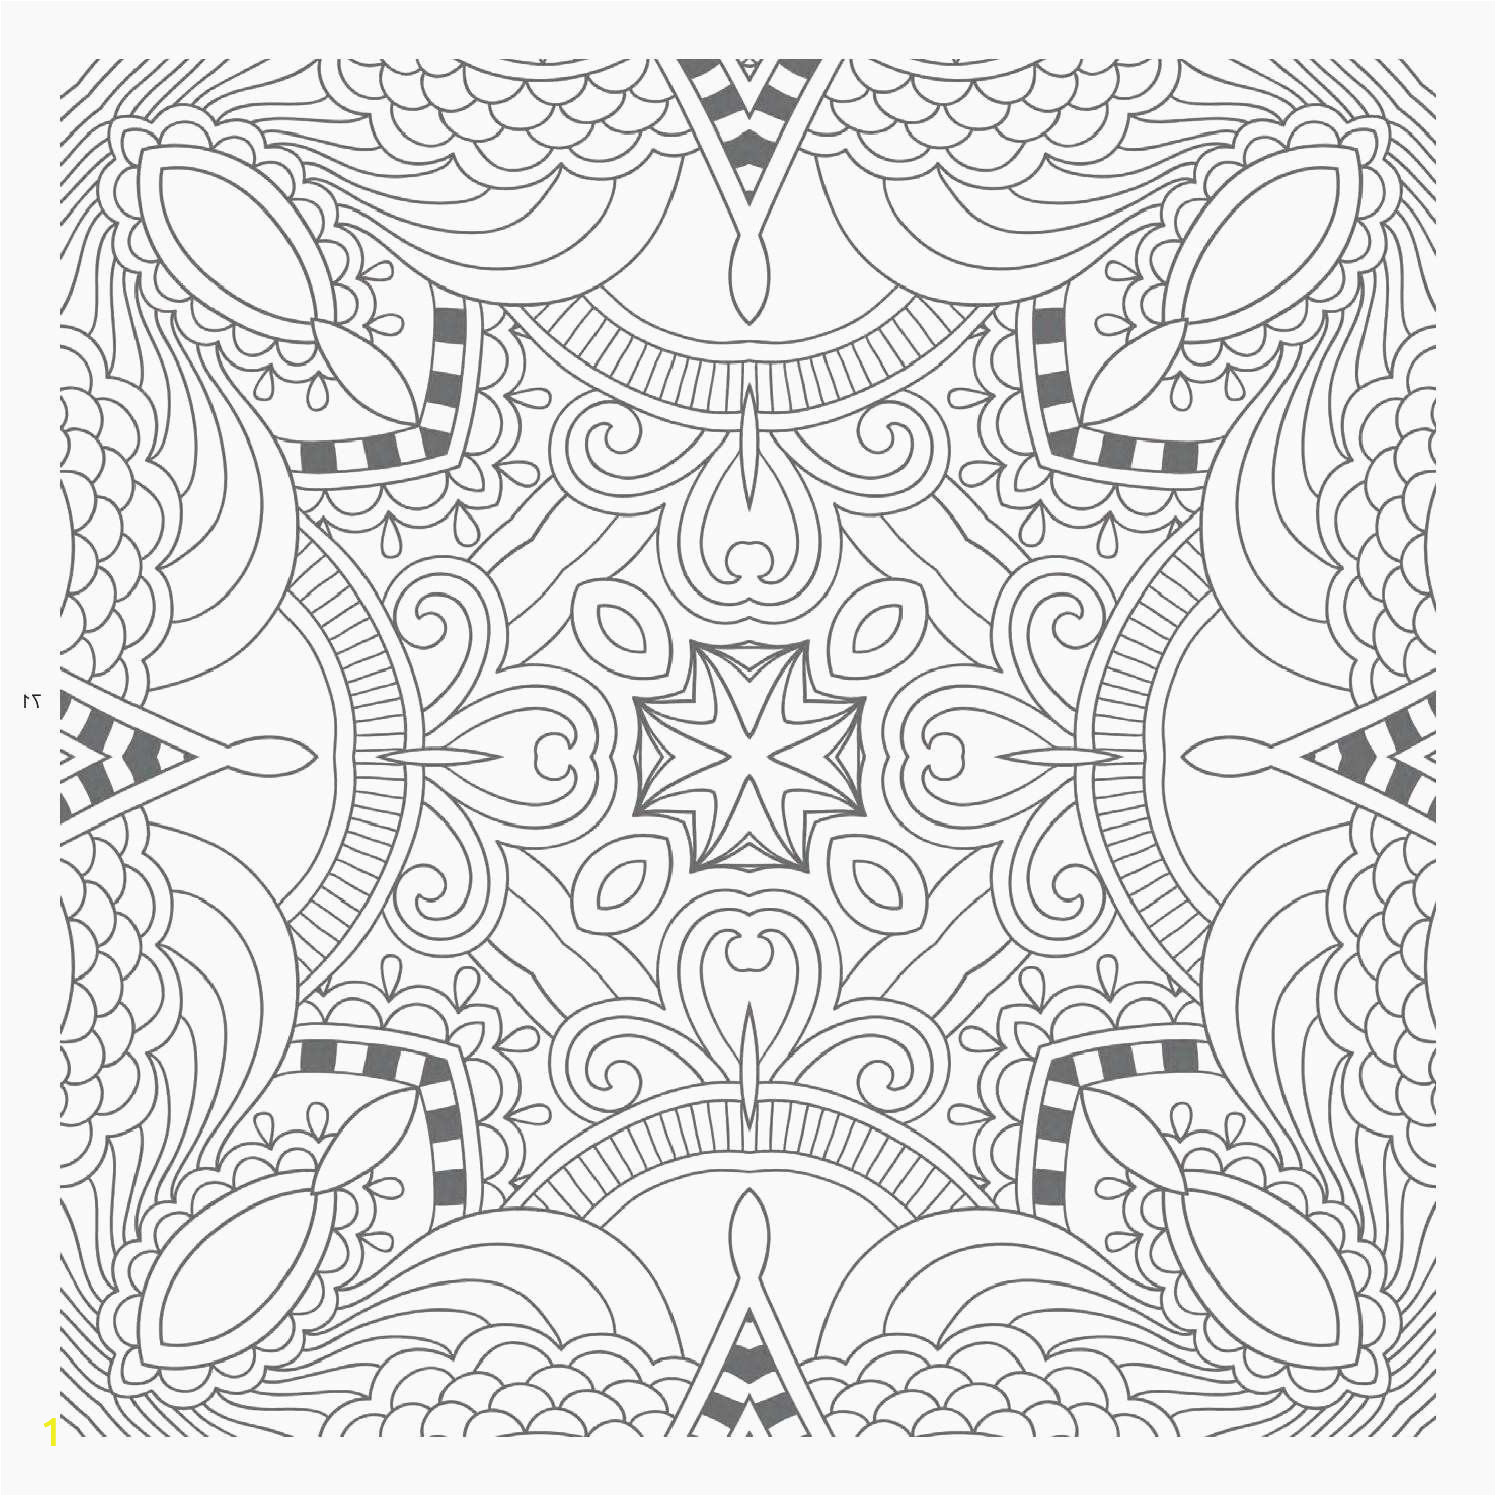 printable coloring page for adults patterns new photography patterns to color awesome printable coloring pages line new line of printable coloring page for adults patterns